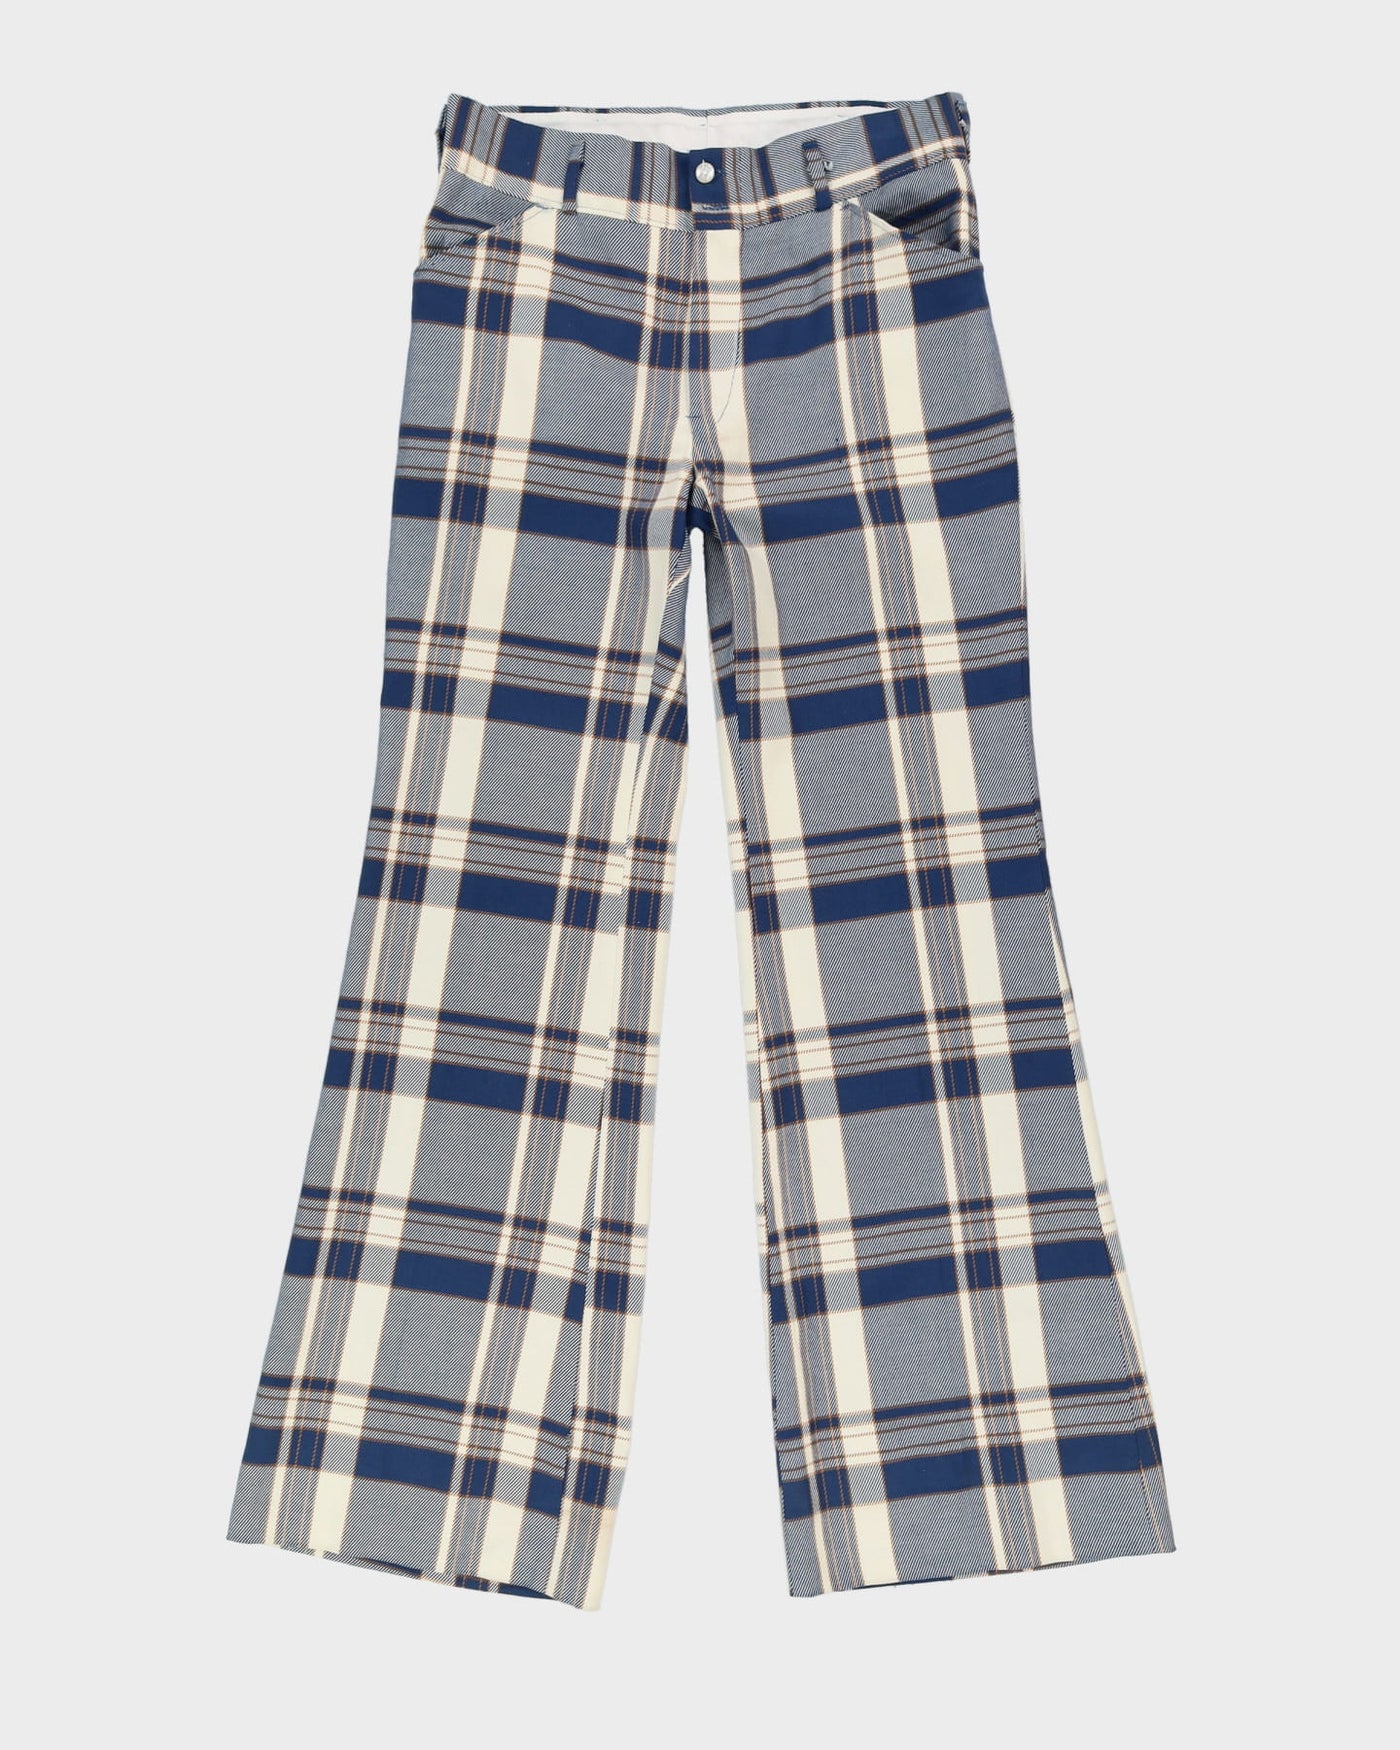 Vintage Blue Check Patterned Flared Trousers - W34 L34